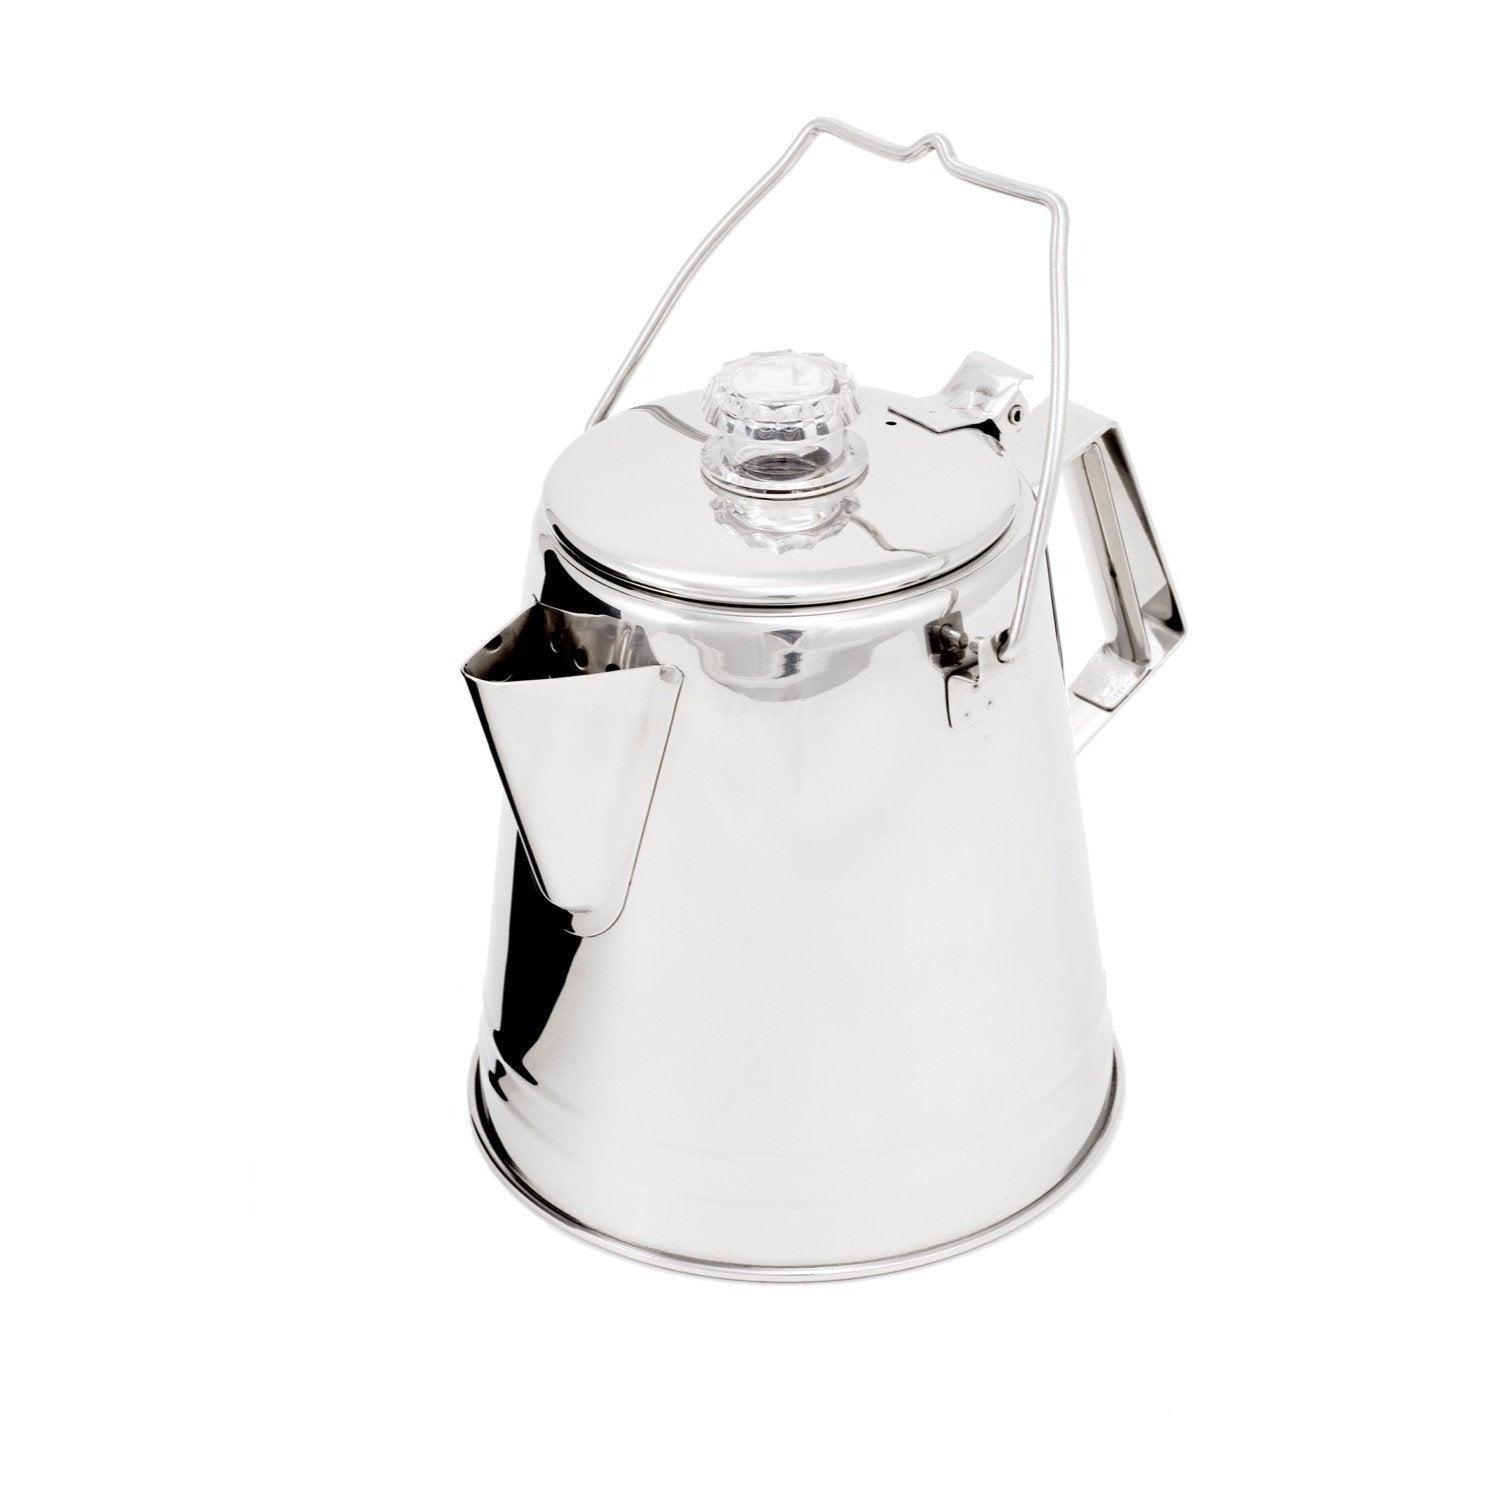 GSI Outdoors, GSI Outdoors Glacier Stainless 8 Cup Percolator, Real coffee makers, filters, & grinders, Wylies Outdoor World,